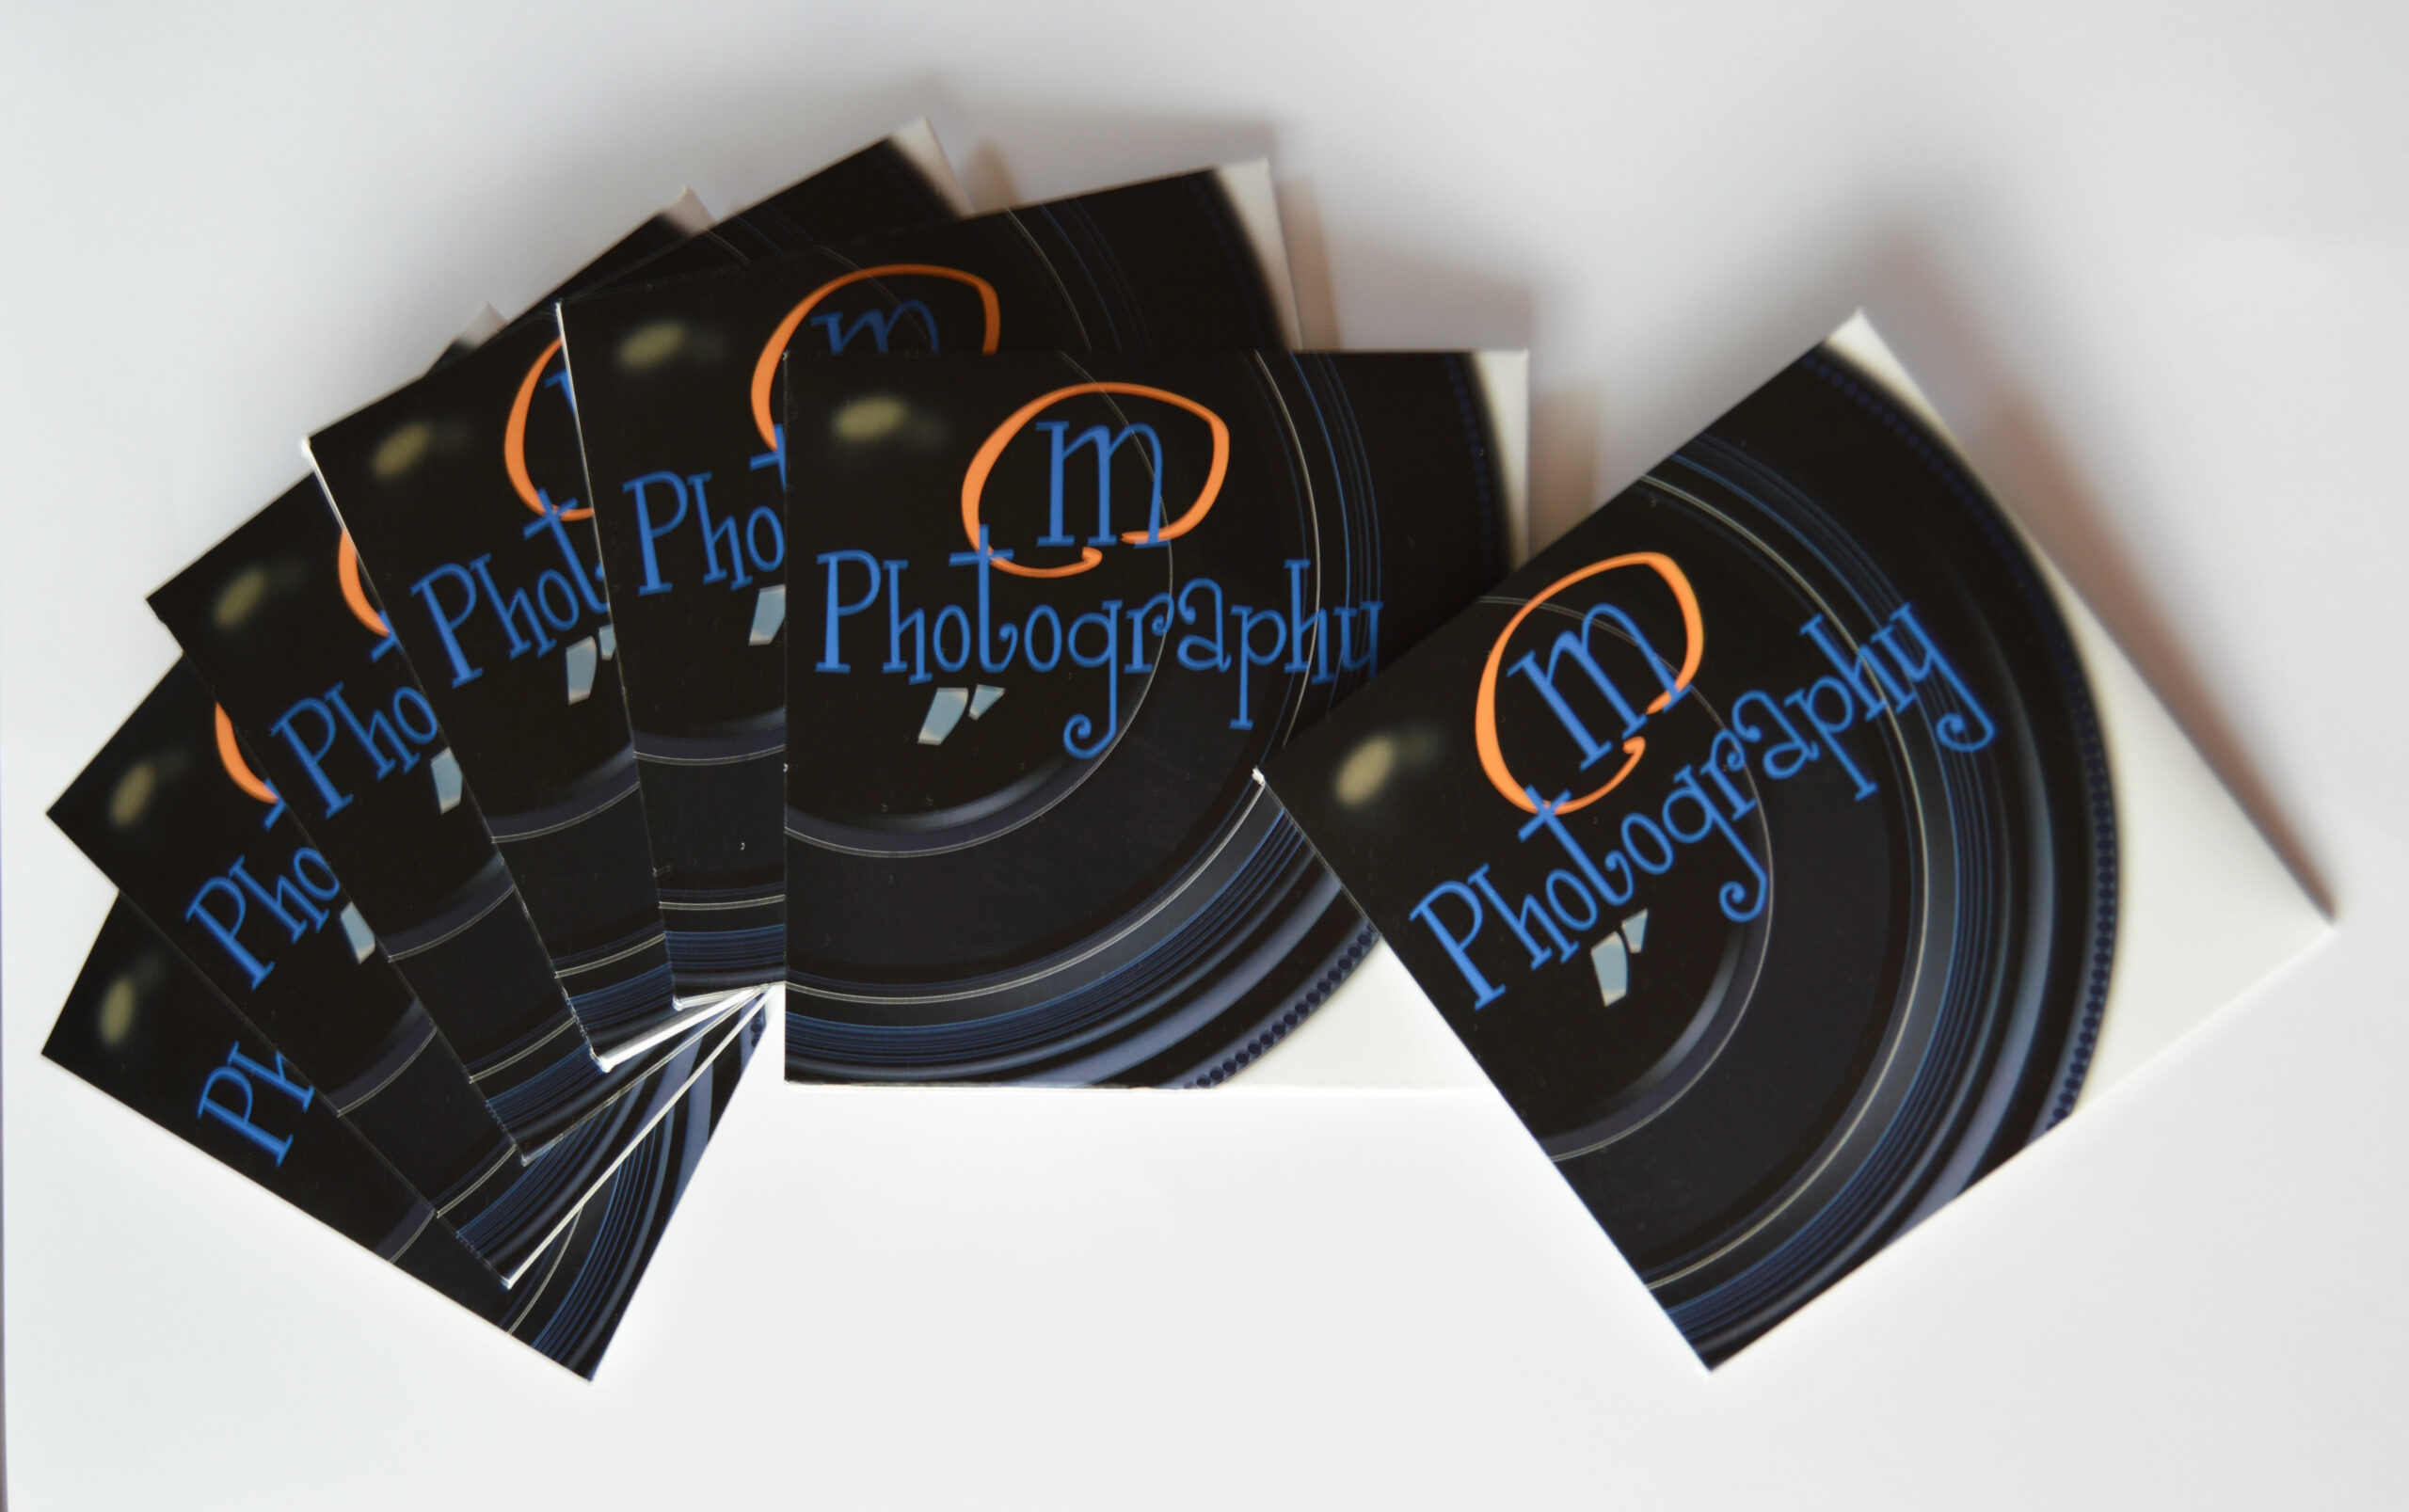 Custom CD Covers for M Photography